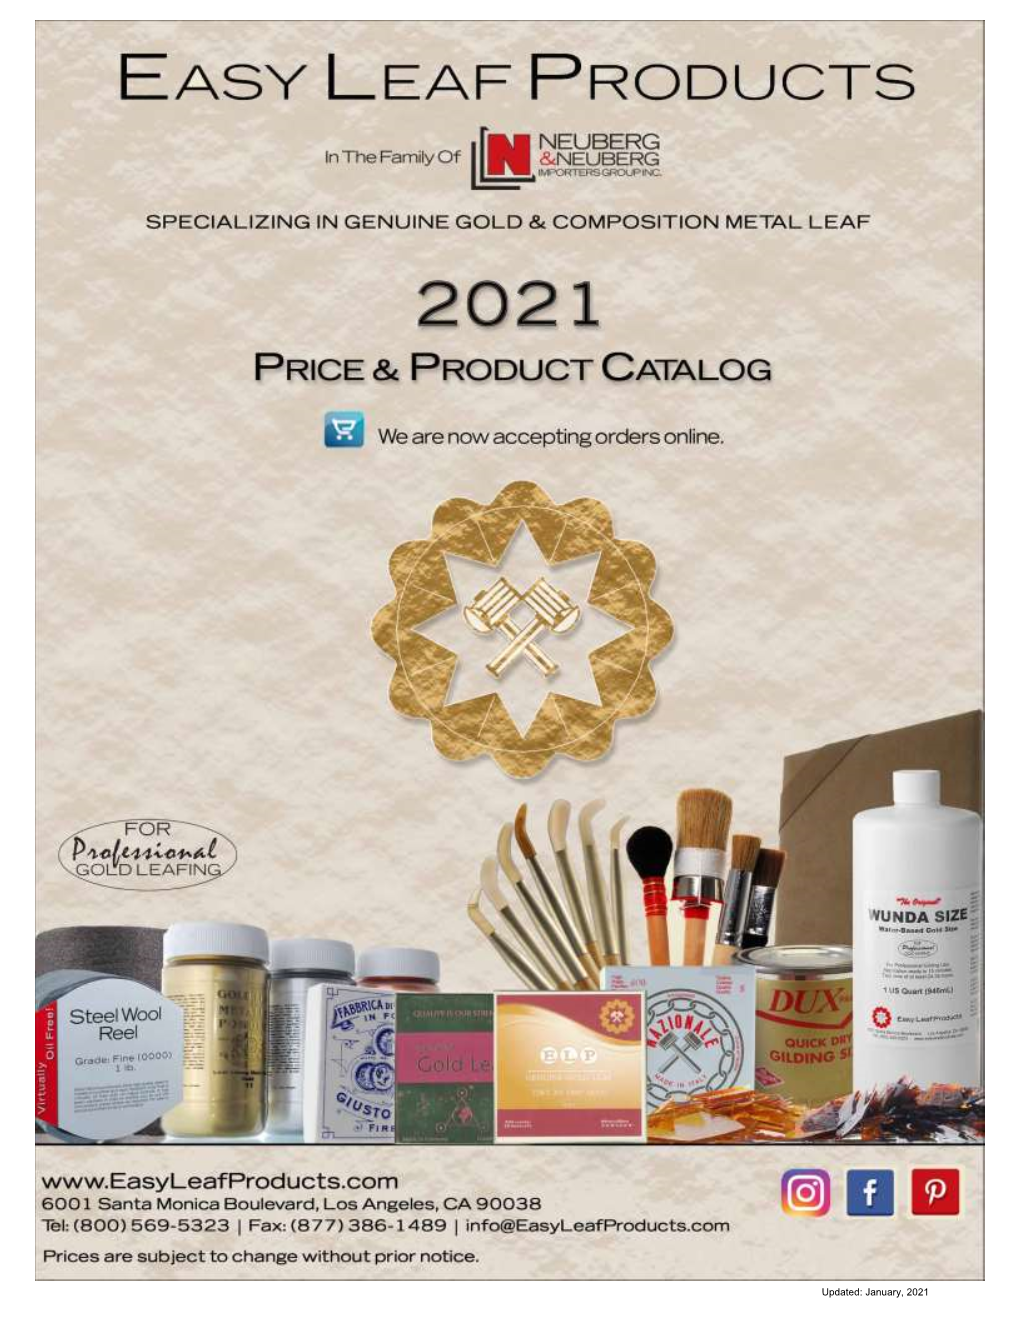 Updated: January, 2021 Professional Gold Leafing